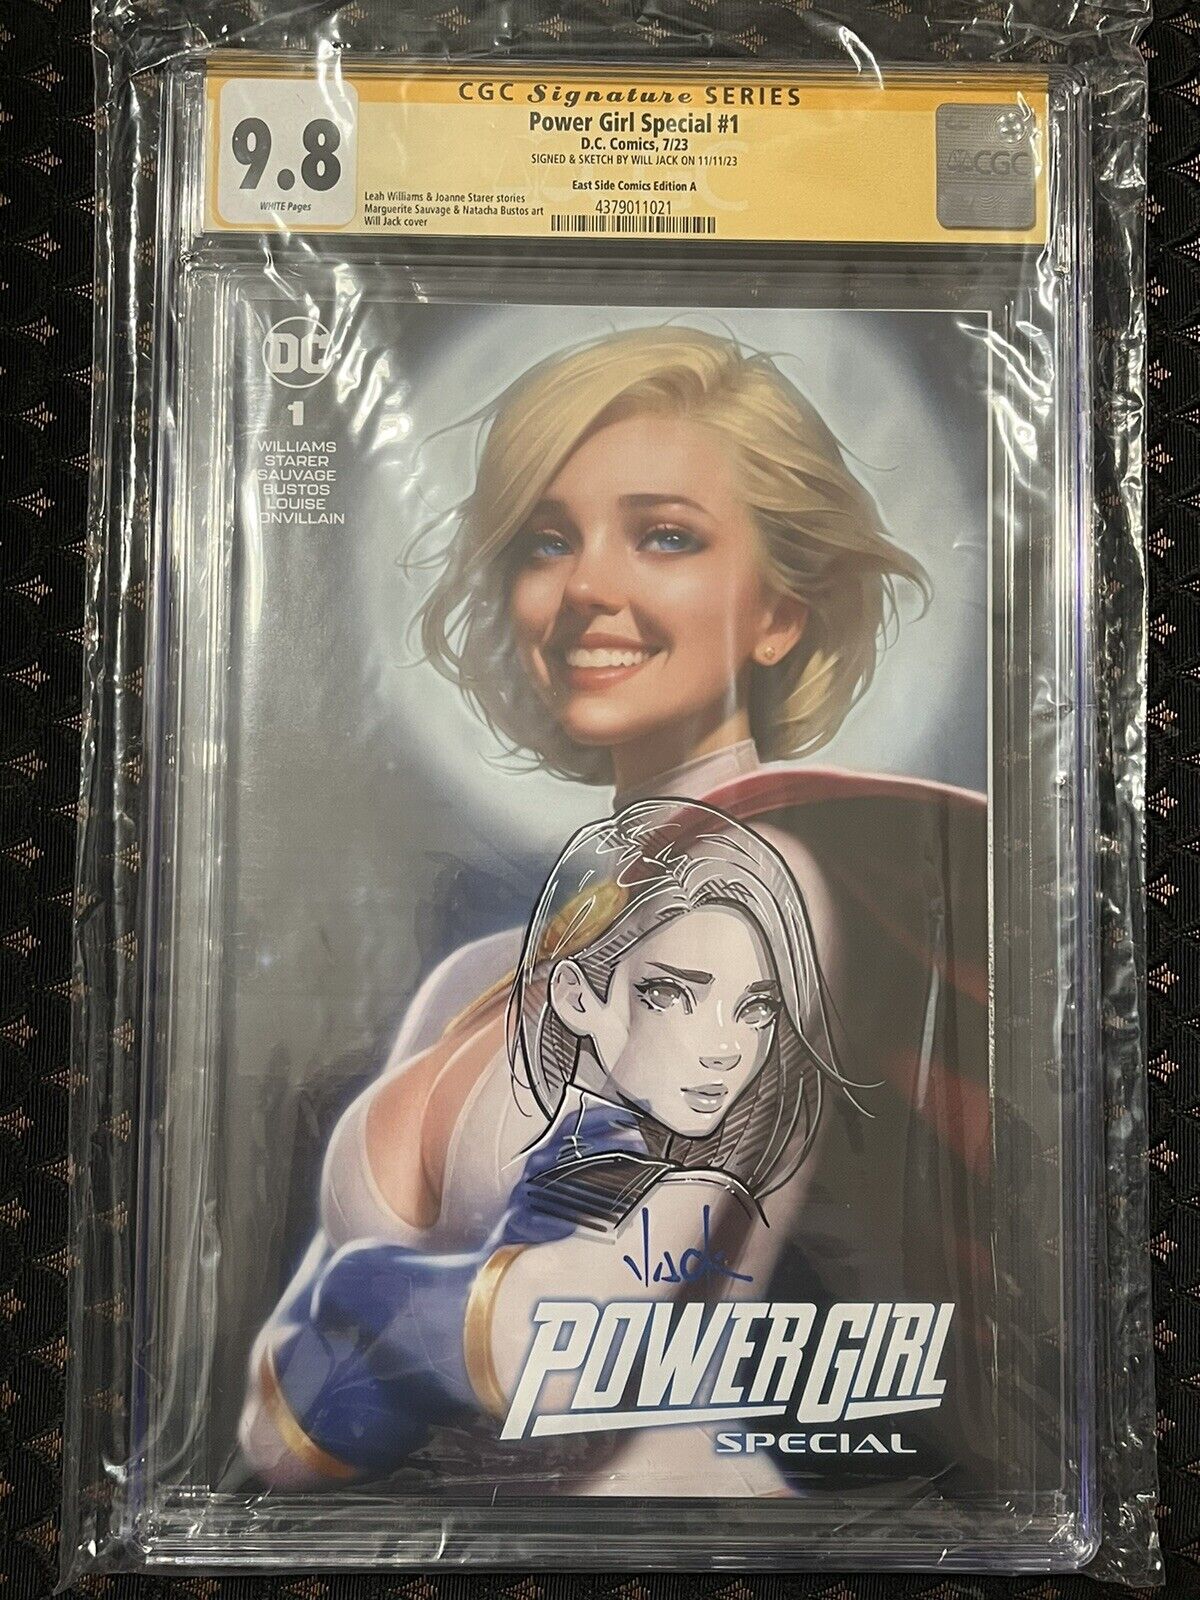 Power Girl Special 1 Will Jack Signed & Remarked Virgin Variant CGC 9.8